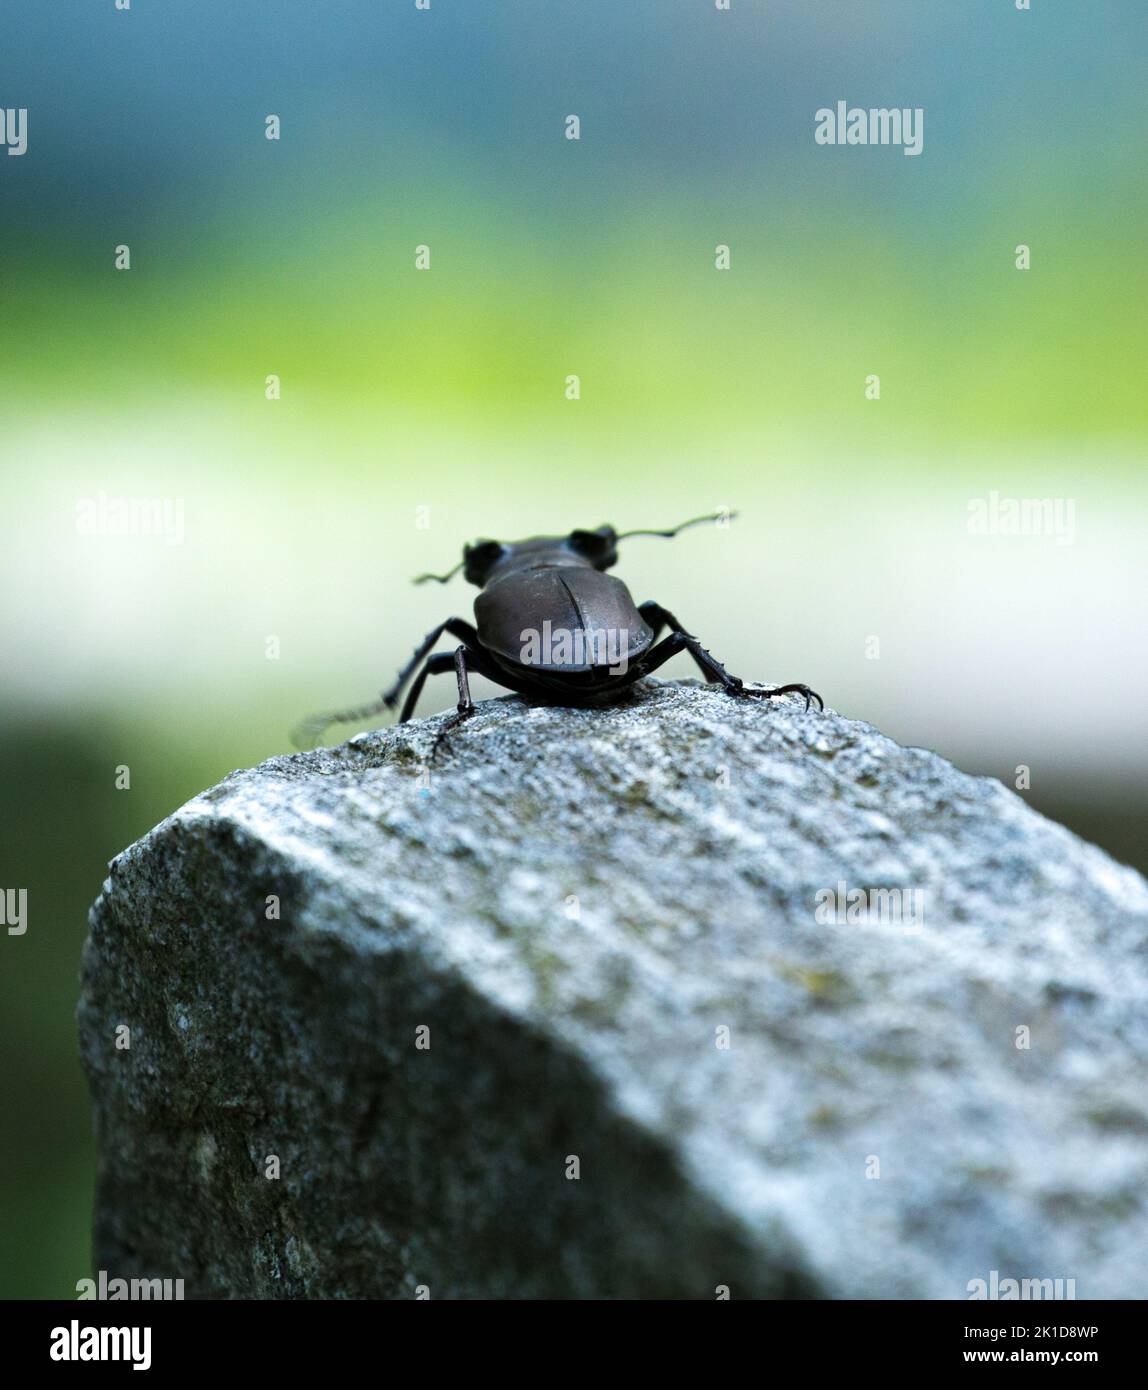 One black weevil runs over the rock towards the abyss. Stock Photo